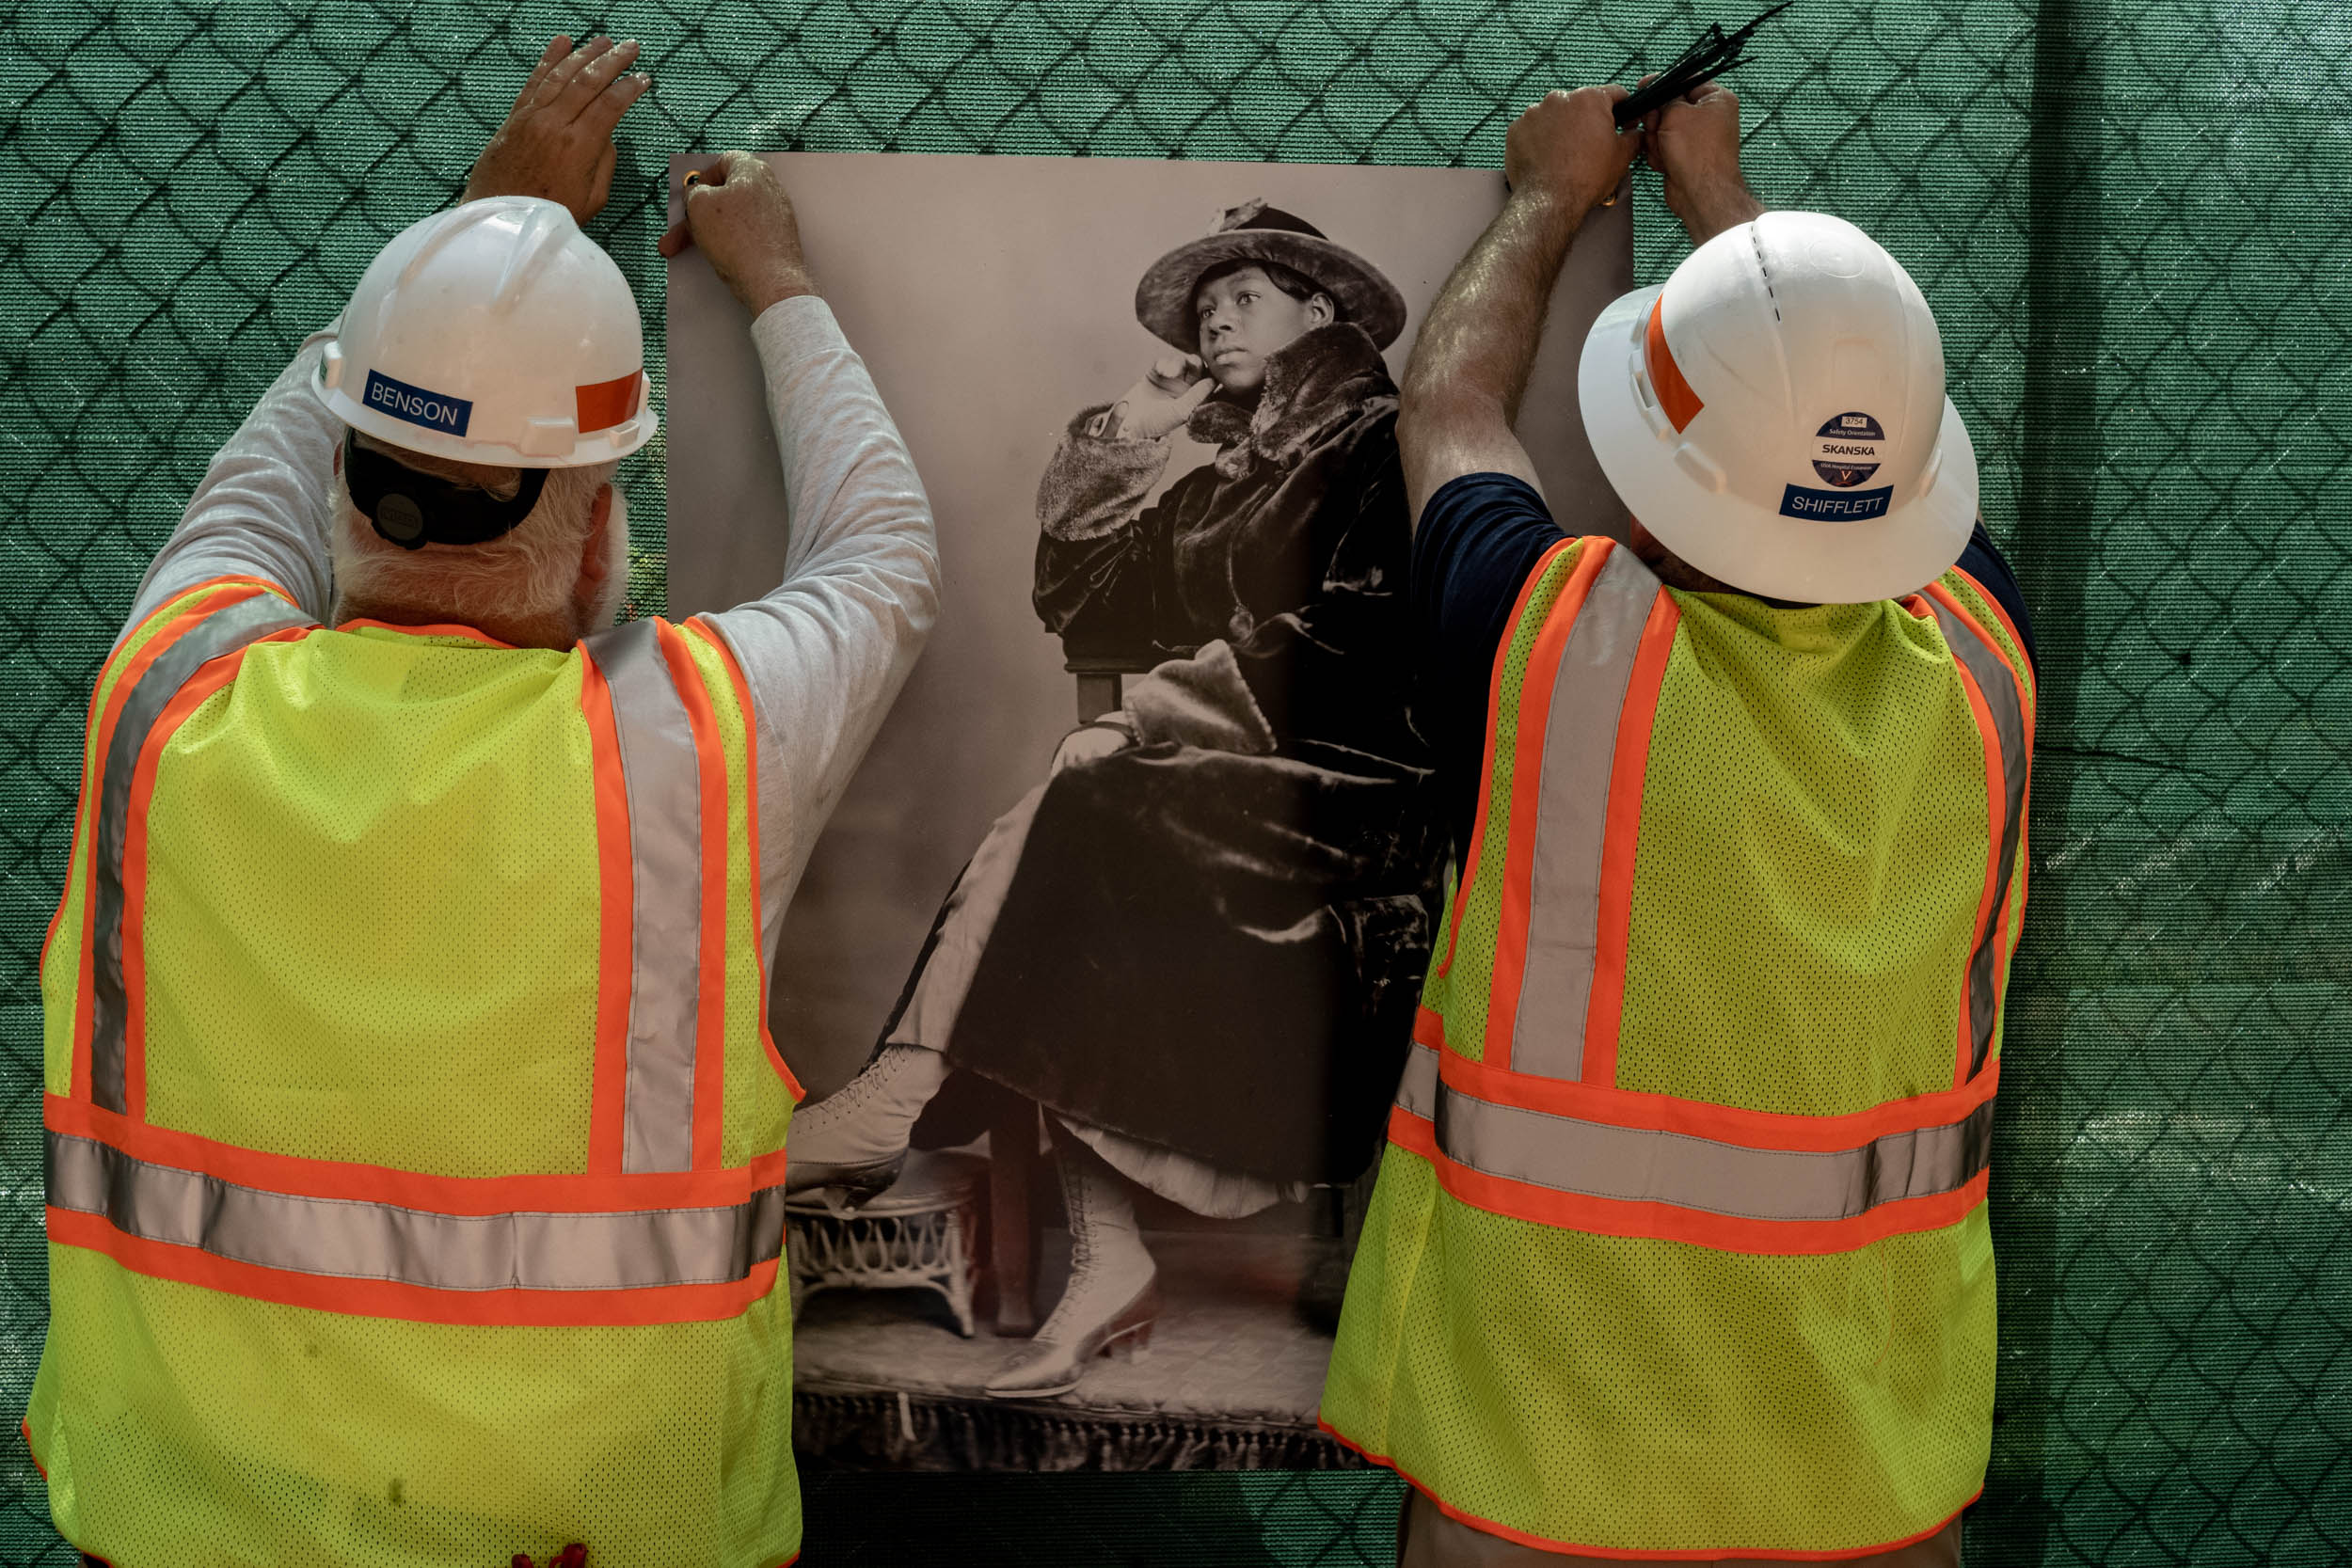 Construction workers hang images on a chain link fence